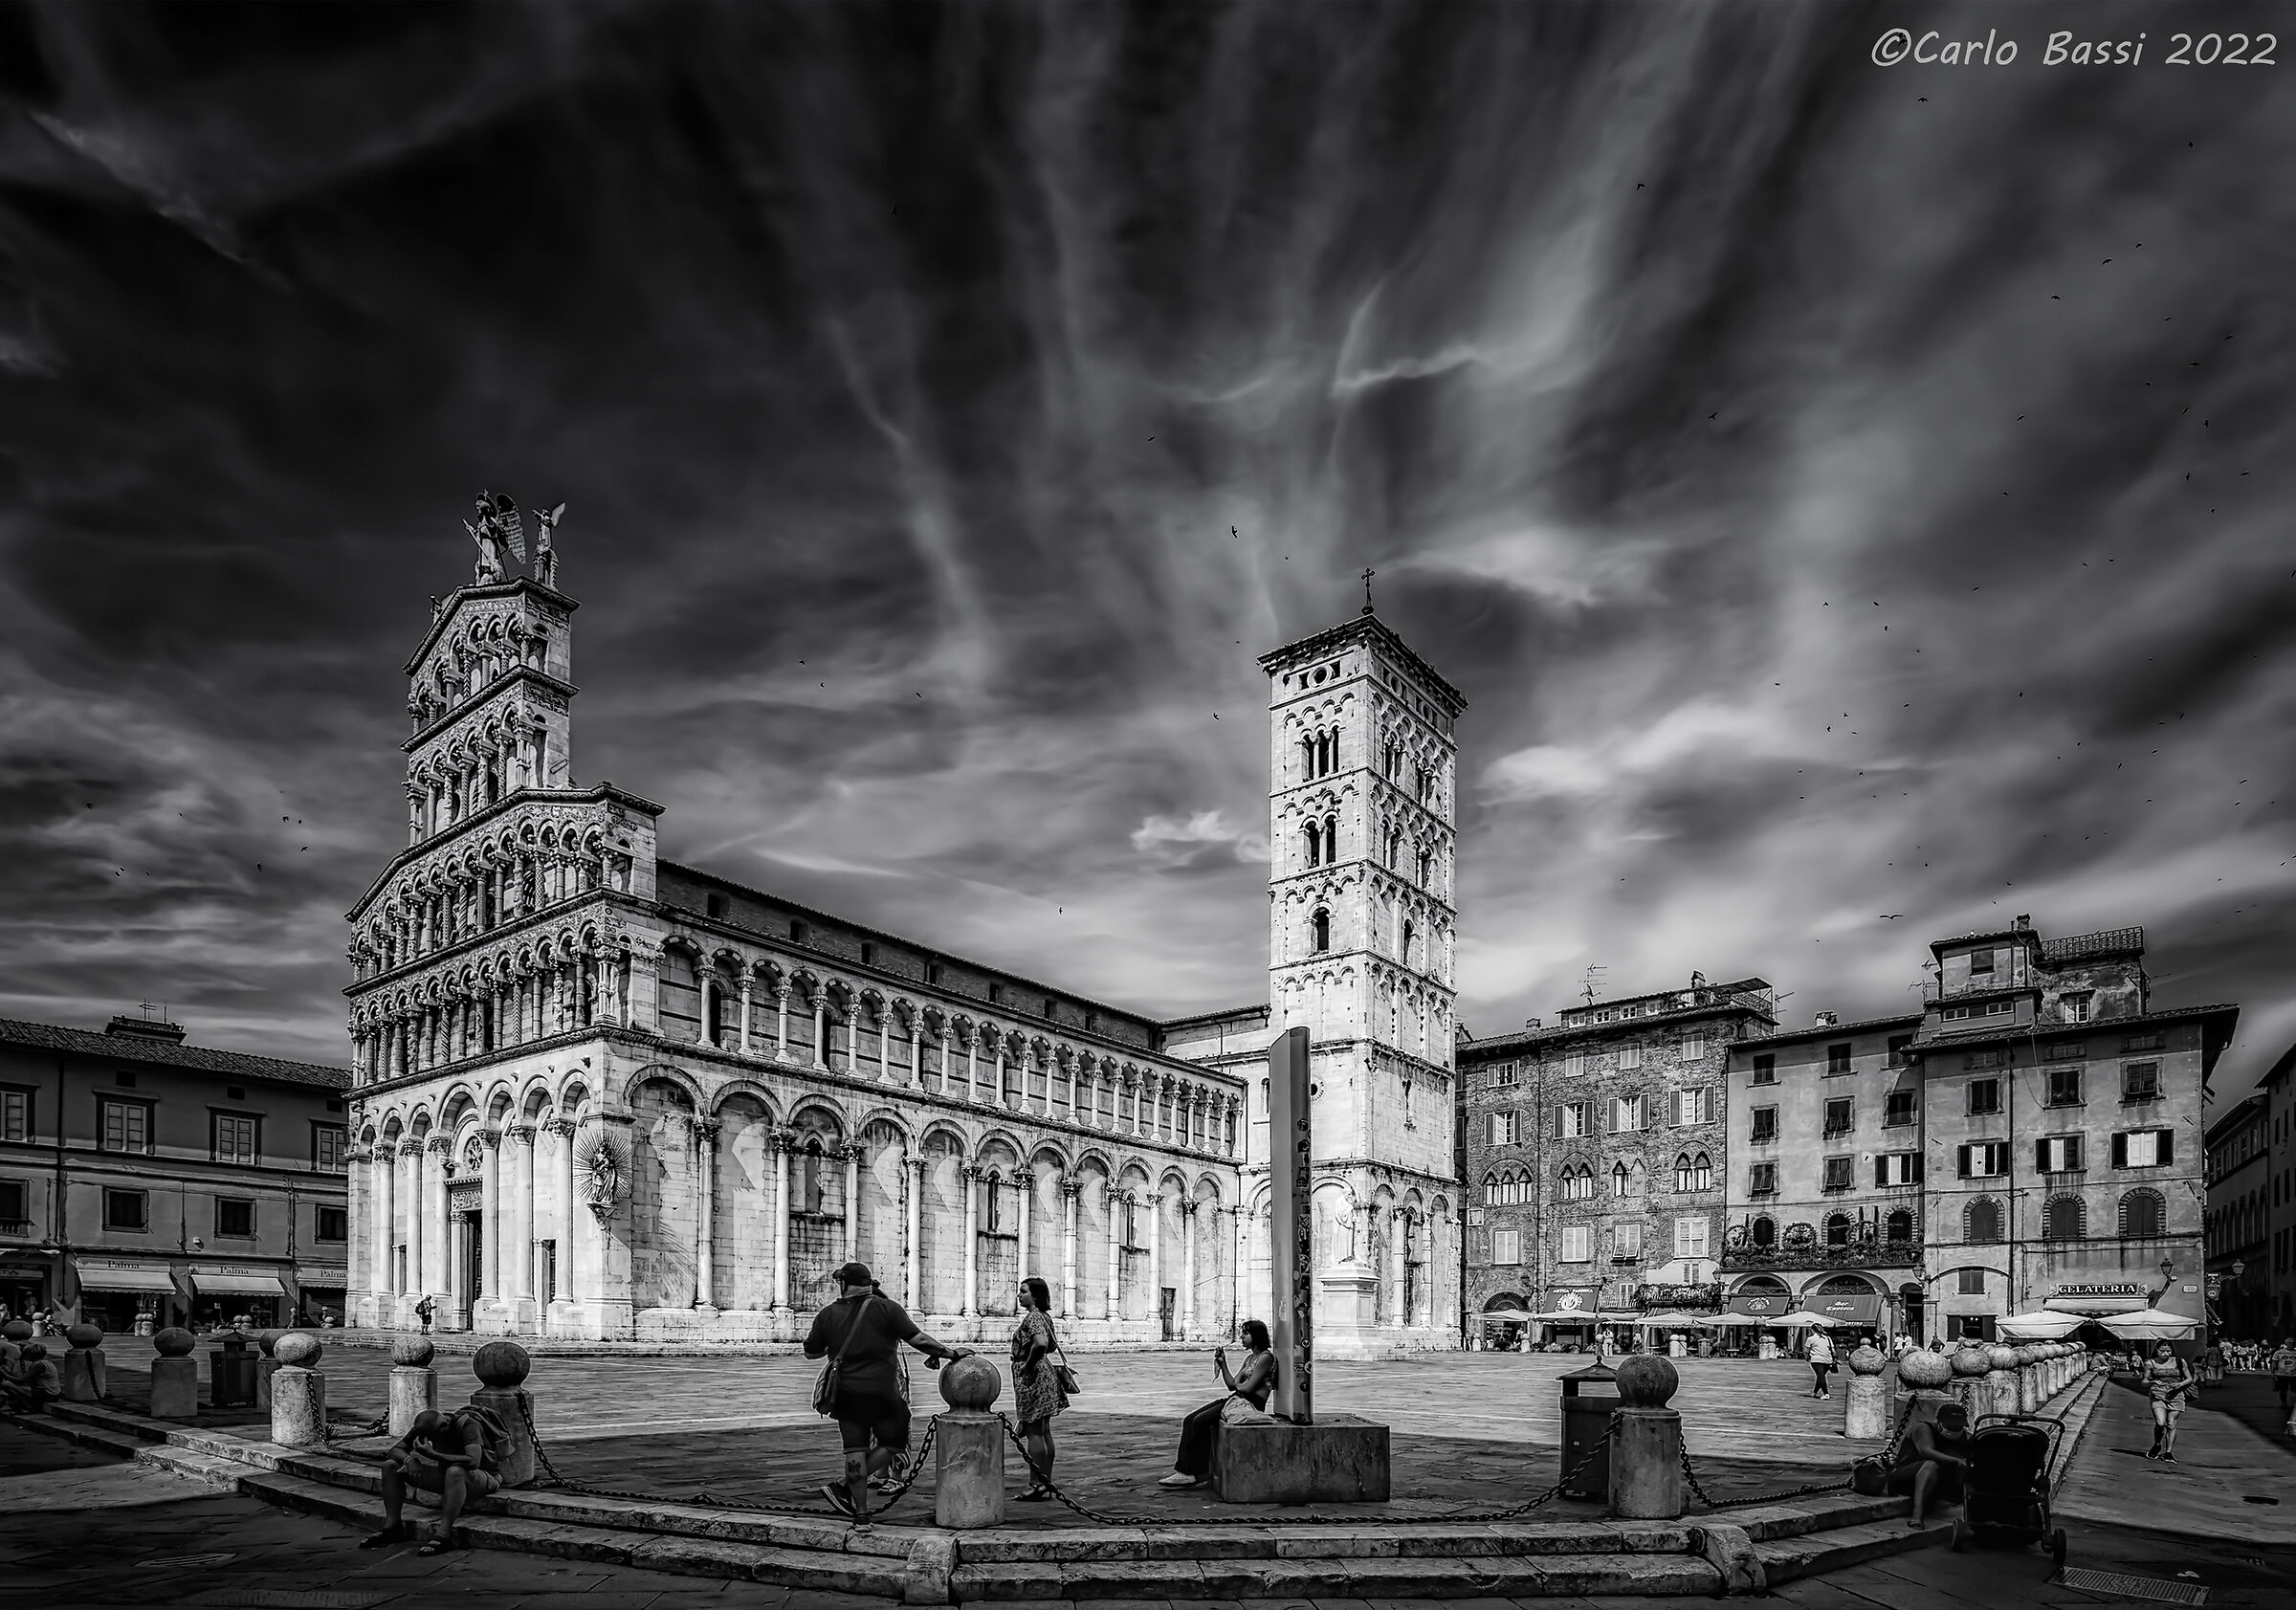 A postcard from Lucca...